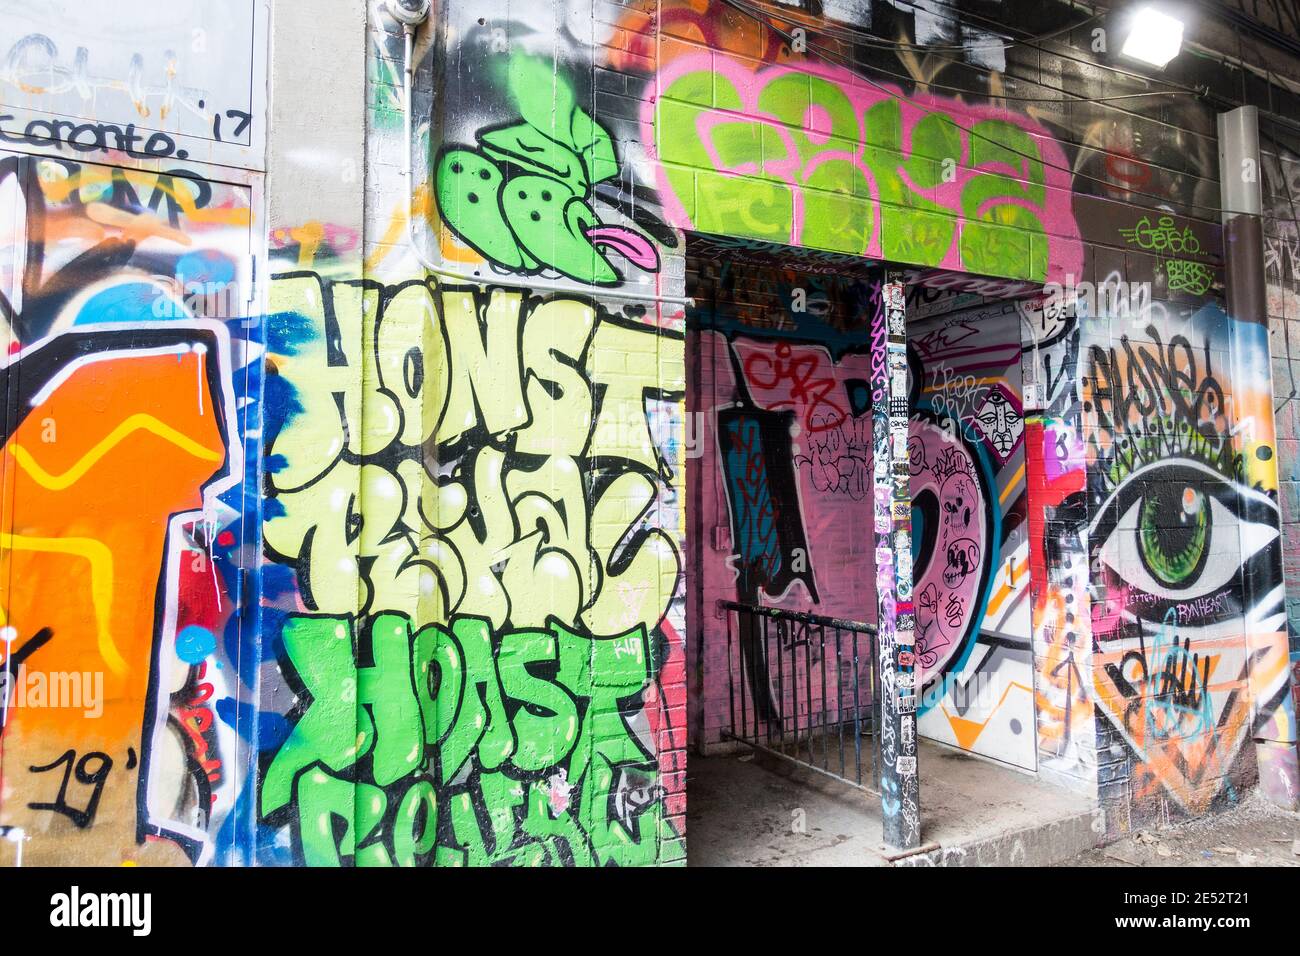 A large number of colourful wall paintings that have become a minor tourist attraction in an area known as Graffiti Alley in Toronto Ontario Canada Stock Photo